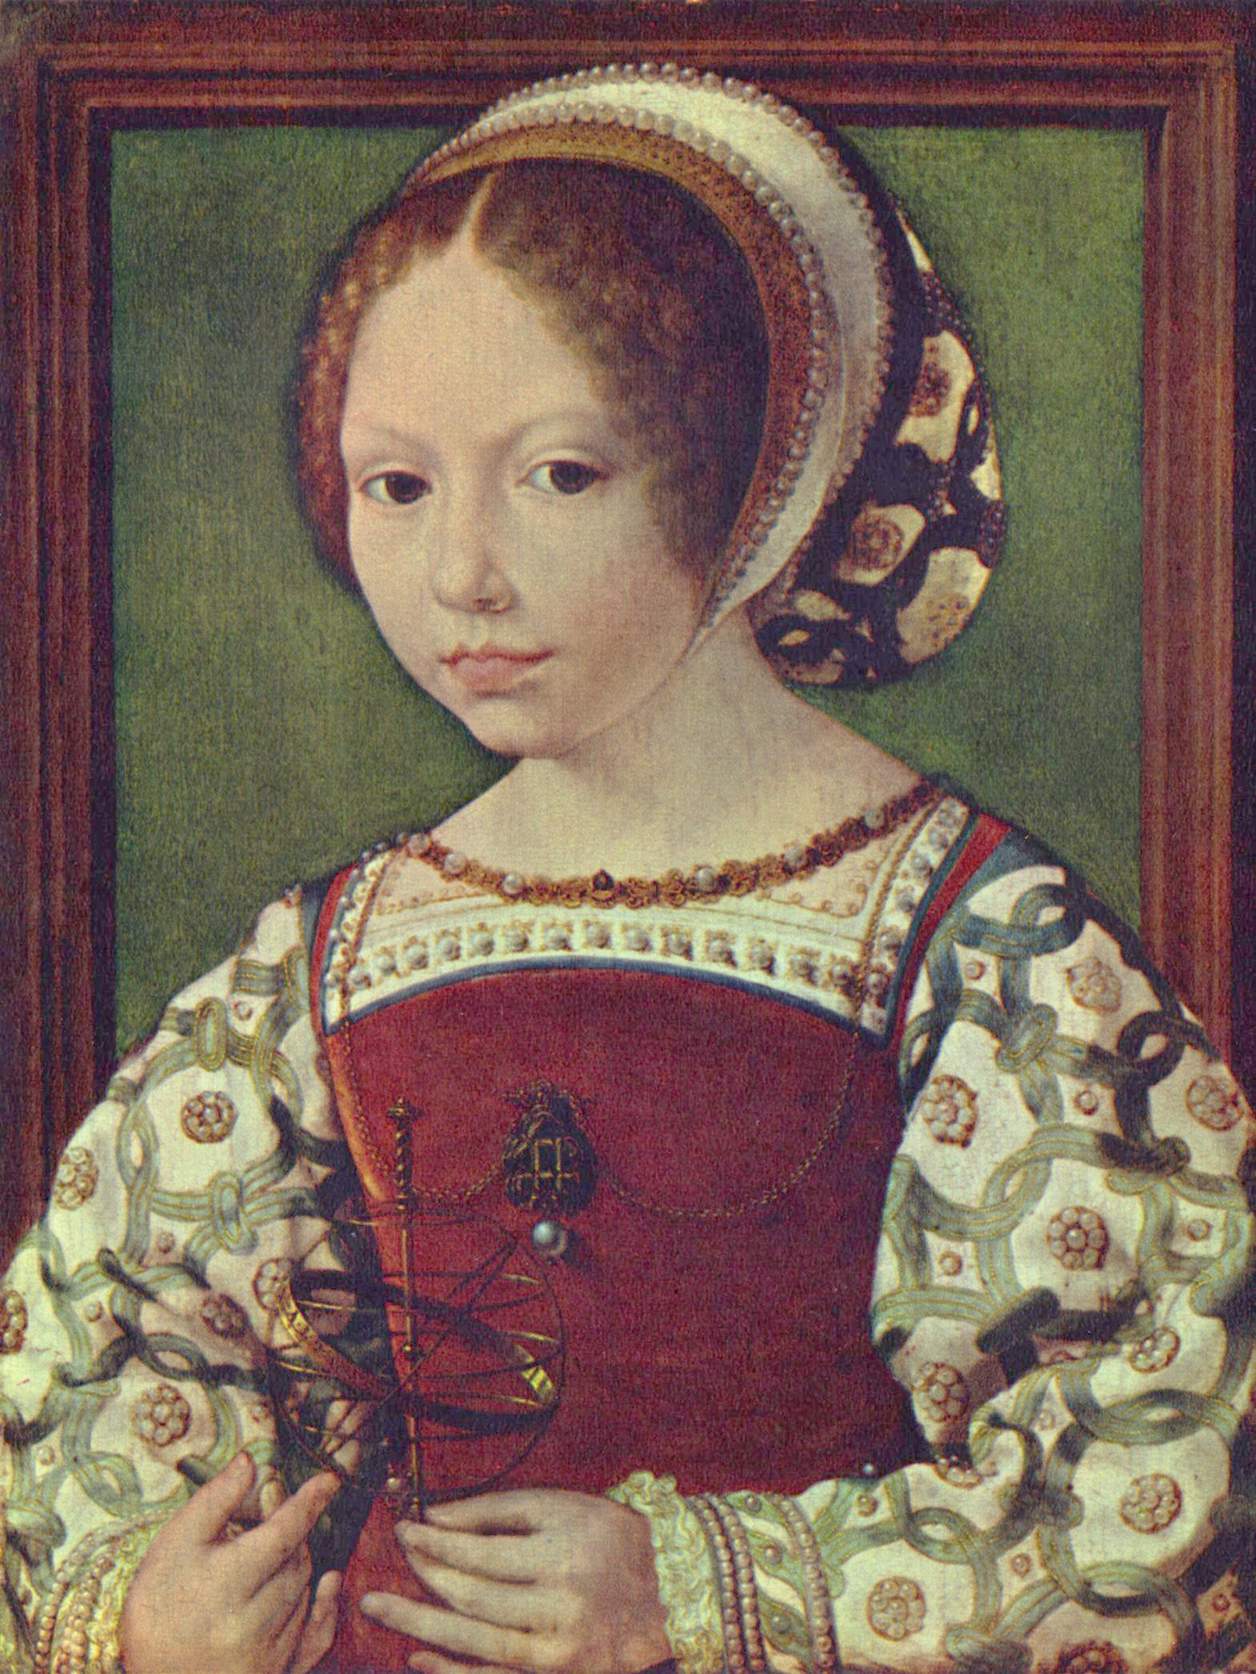 1520 (approx) - Young Girl with Astronomic Instrument by JAN (MABUSE) GOSSAERT